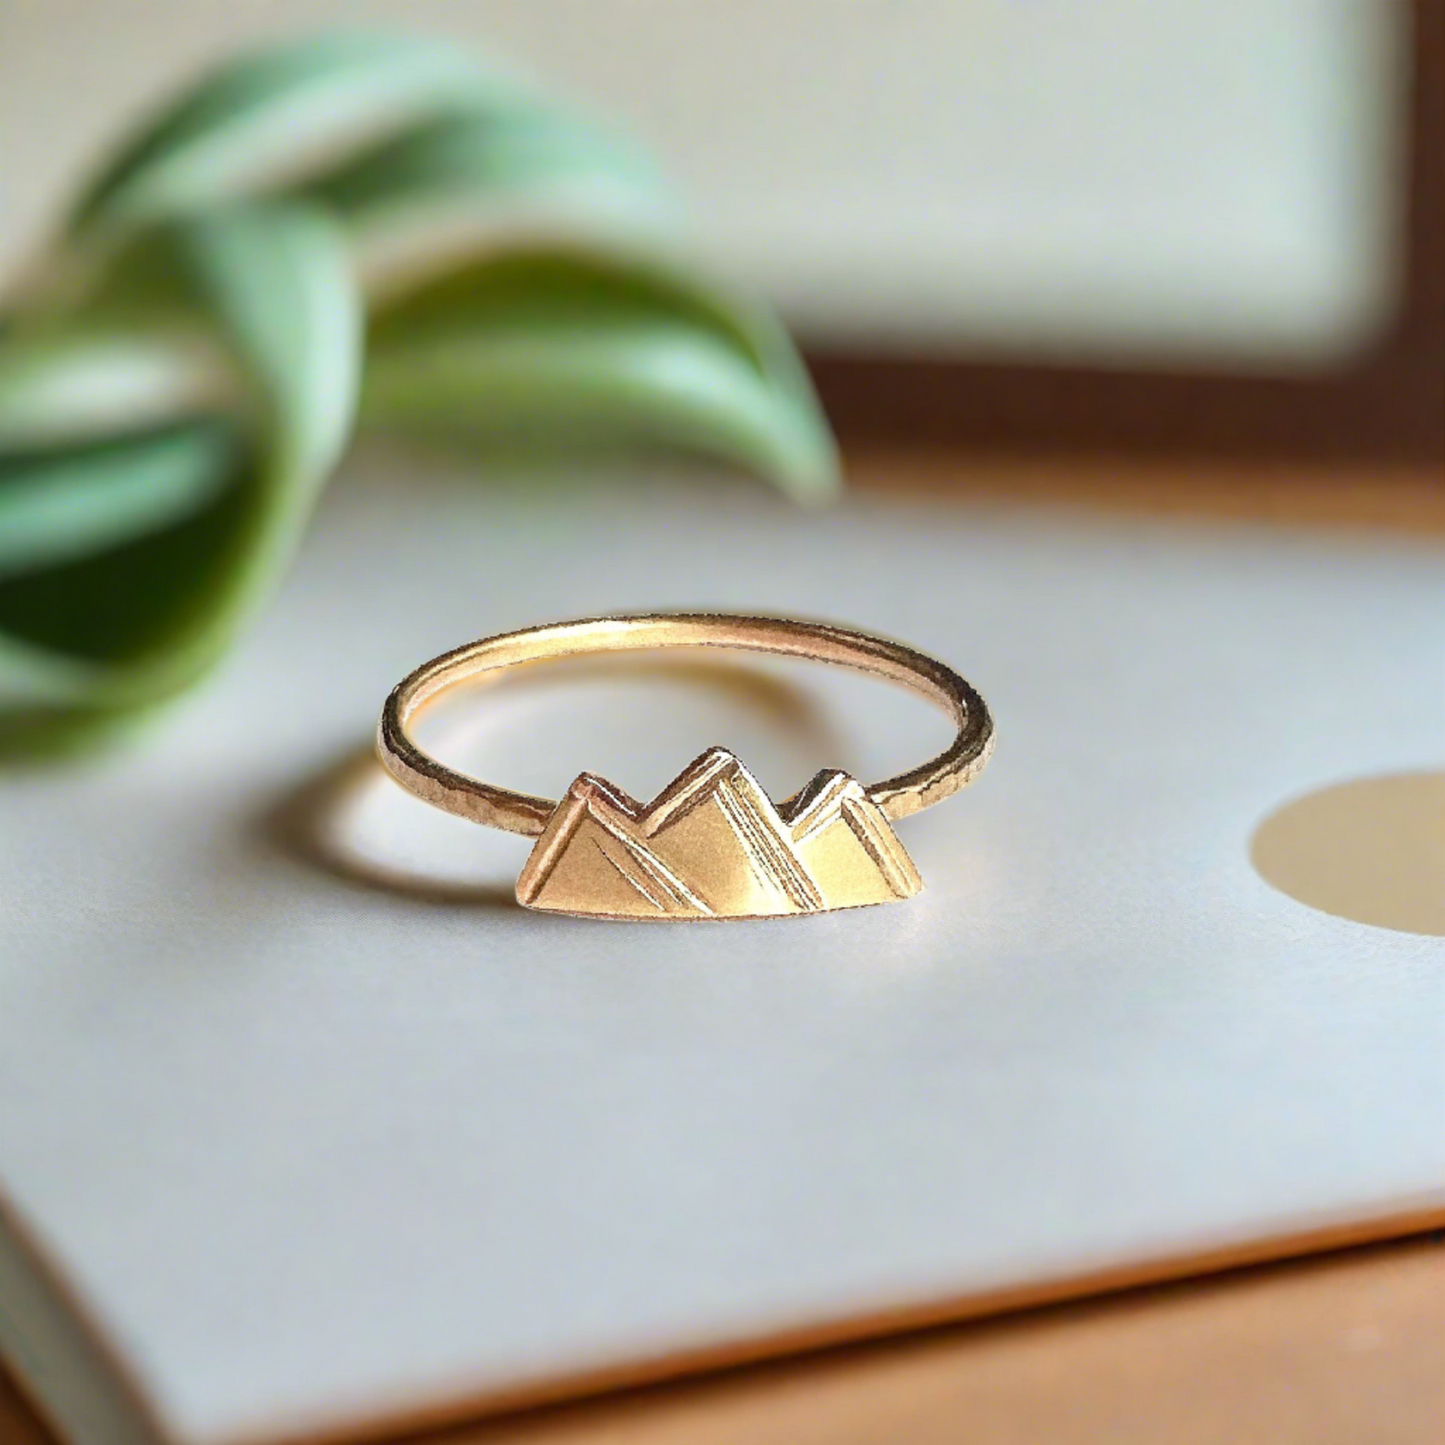 small gold mountain ring with 3 small peaks on a dainty gold textured band 